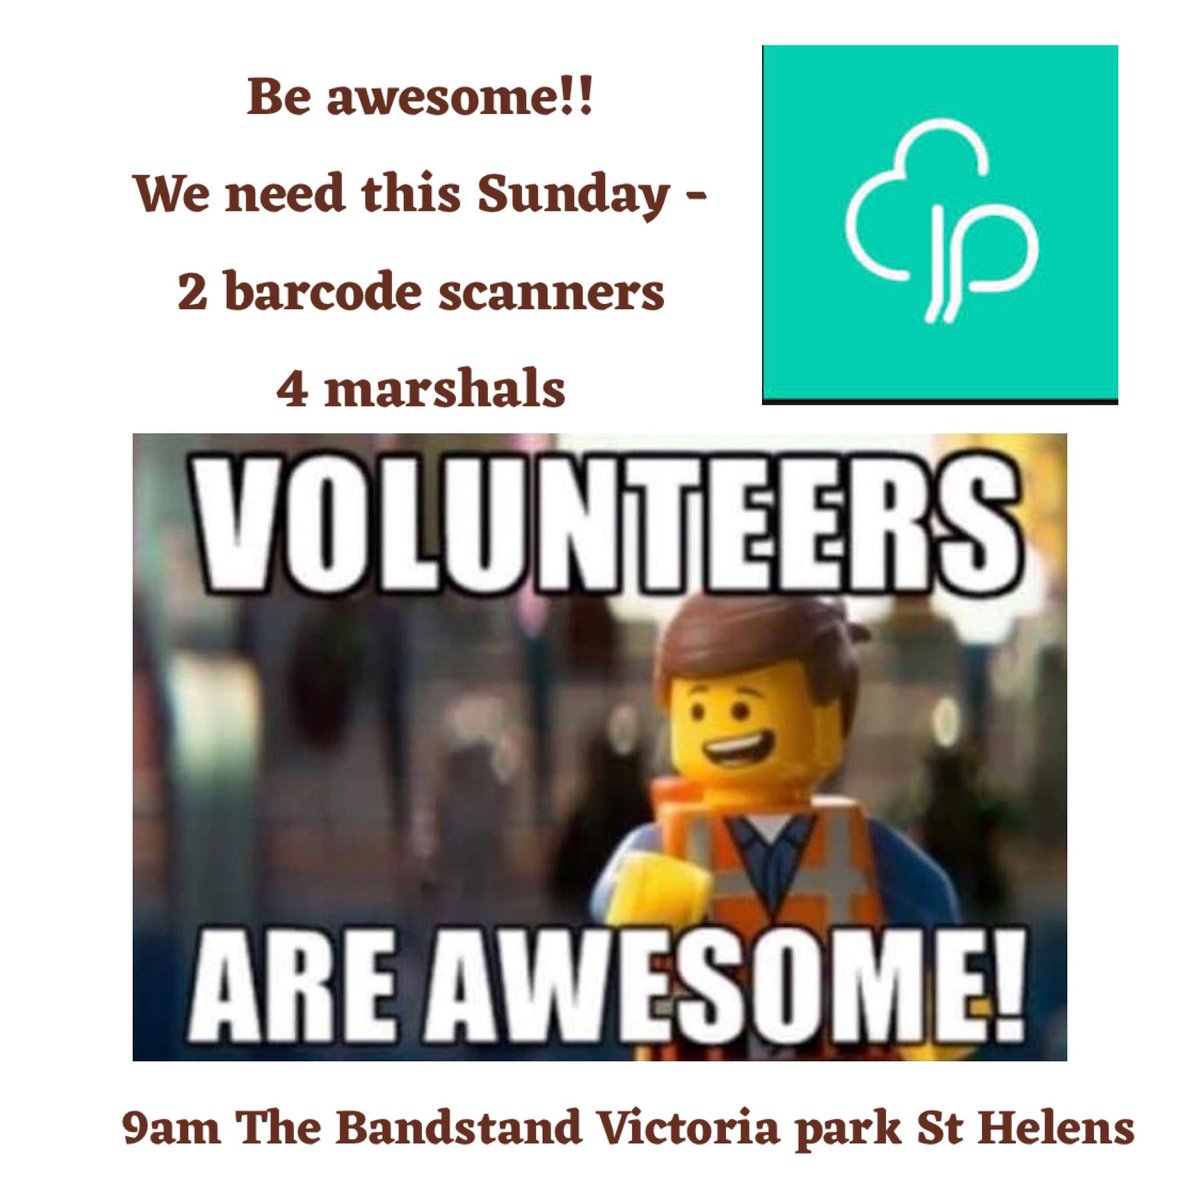 #volunteersareawesome
 Please comment below 👇 if you can help this Sunday